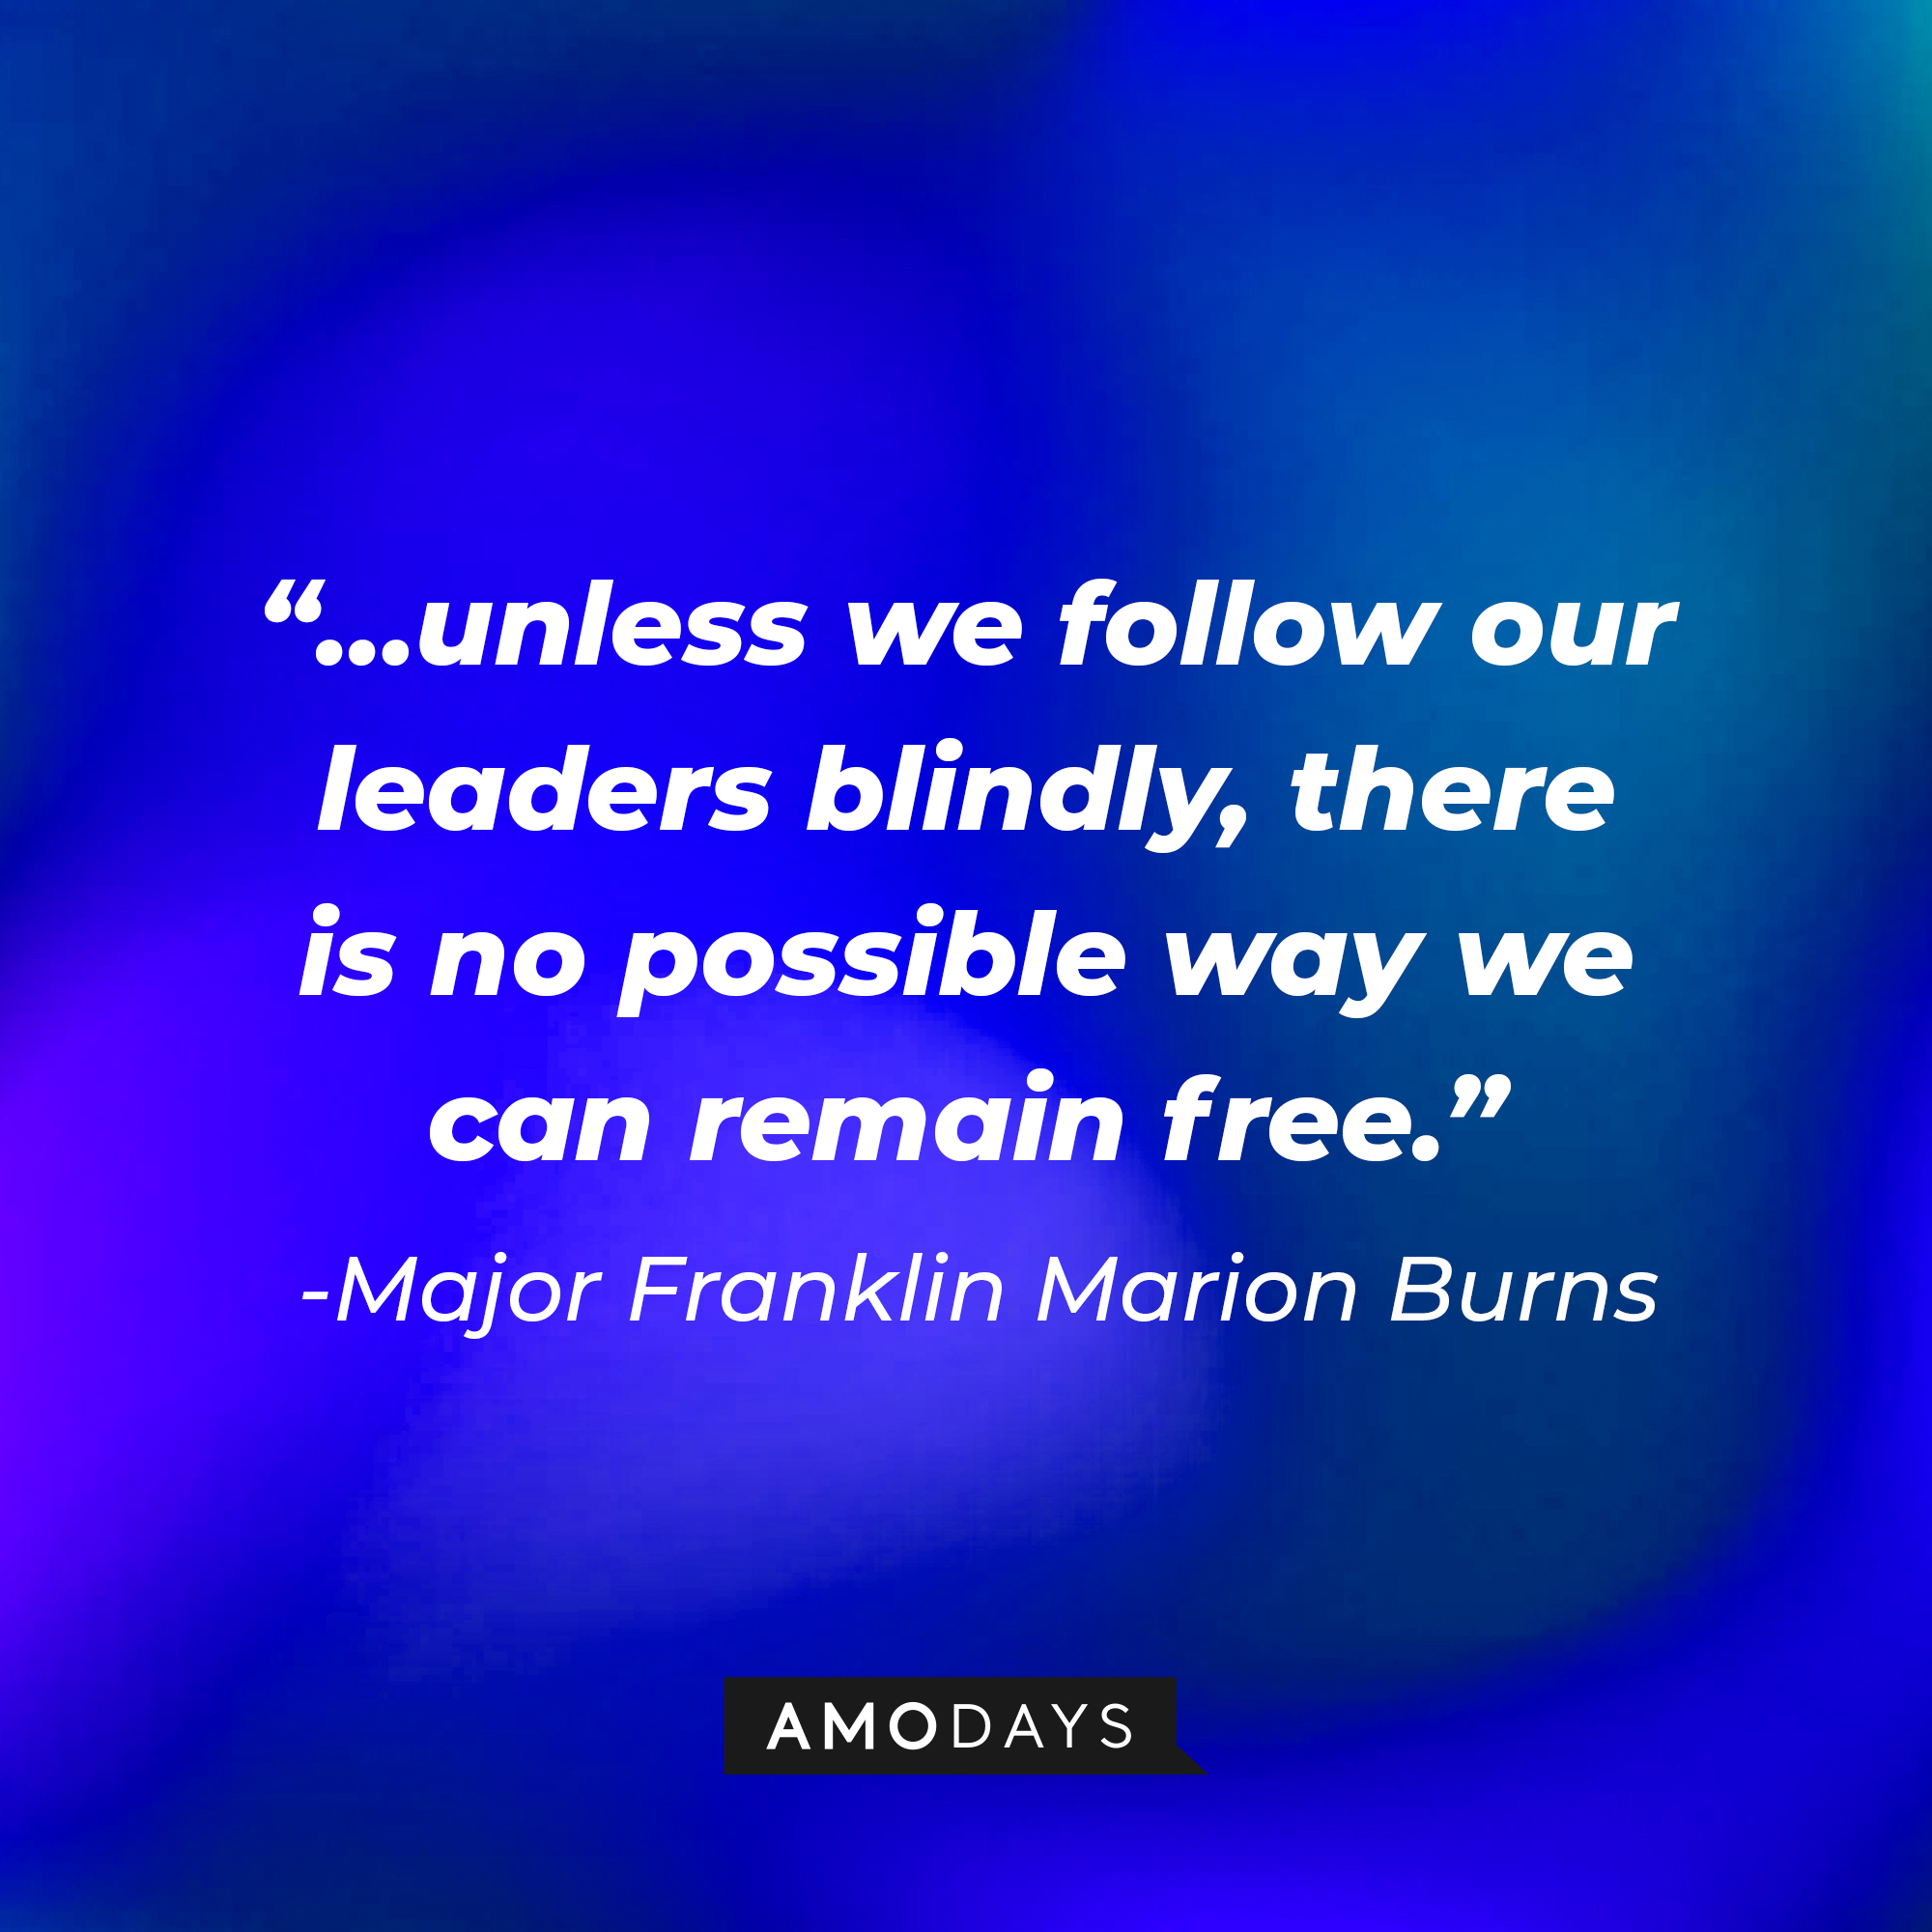 Major Franklin Marion Burn’s quote: “...unless we follow our leaders blindly, there is no possible way we can remain free.” | Source: AmoDays